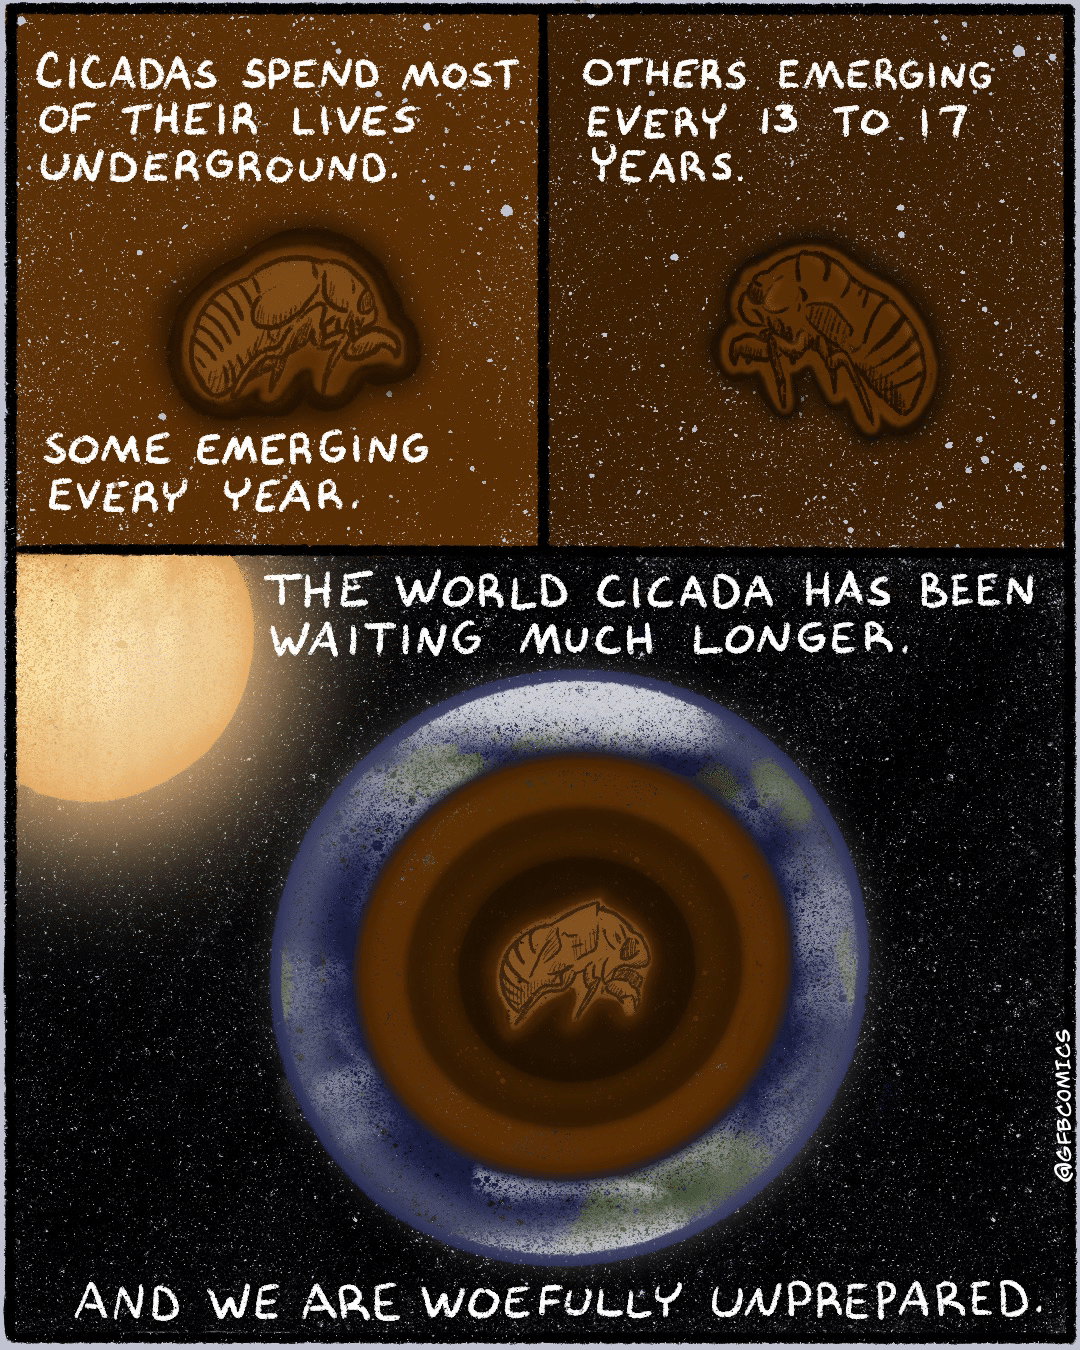 comics comics comics text: CICADAS SPEND. MOST OF THEIR LIVES UNDERGRovNO. SOME EMERGING EVERY OTHERS EMERGING EVERY 13 To 17 YEARS. THE WORLD CICADA HAS BEEN WAITING MUCH LONGER. AND WE ARE WOEFULLY u,VPREPAAED. 